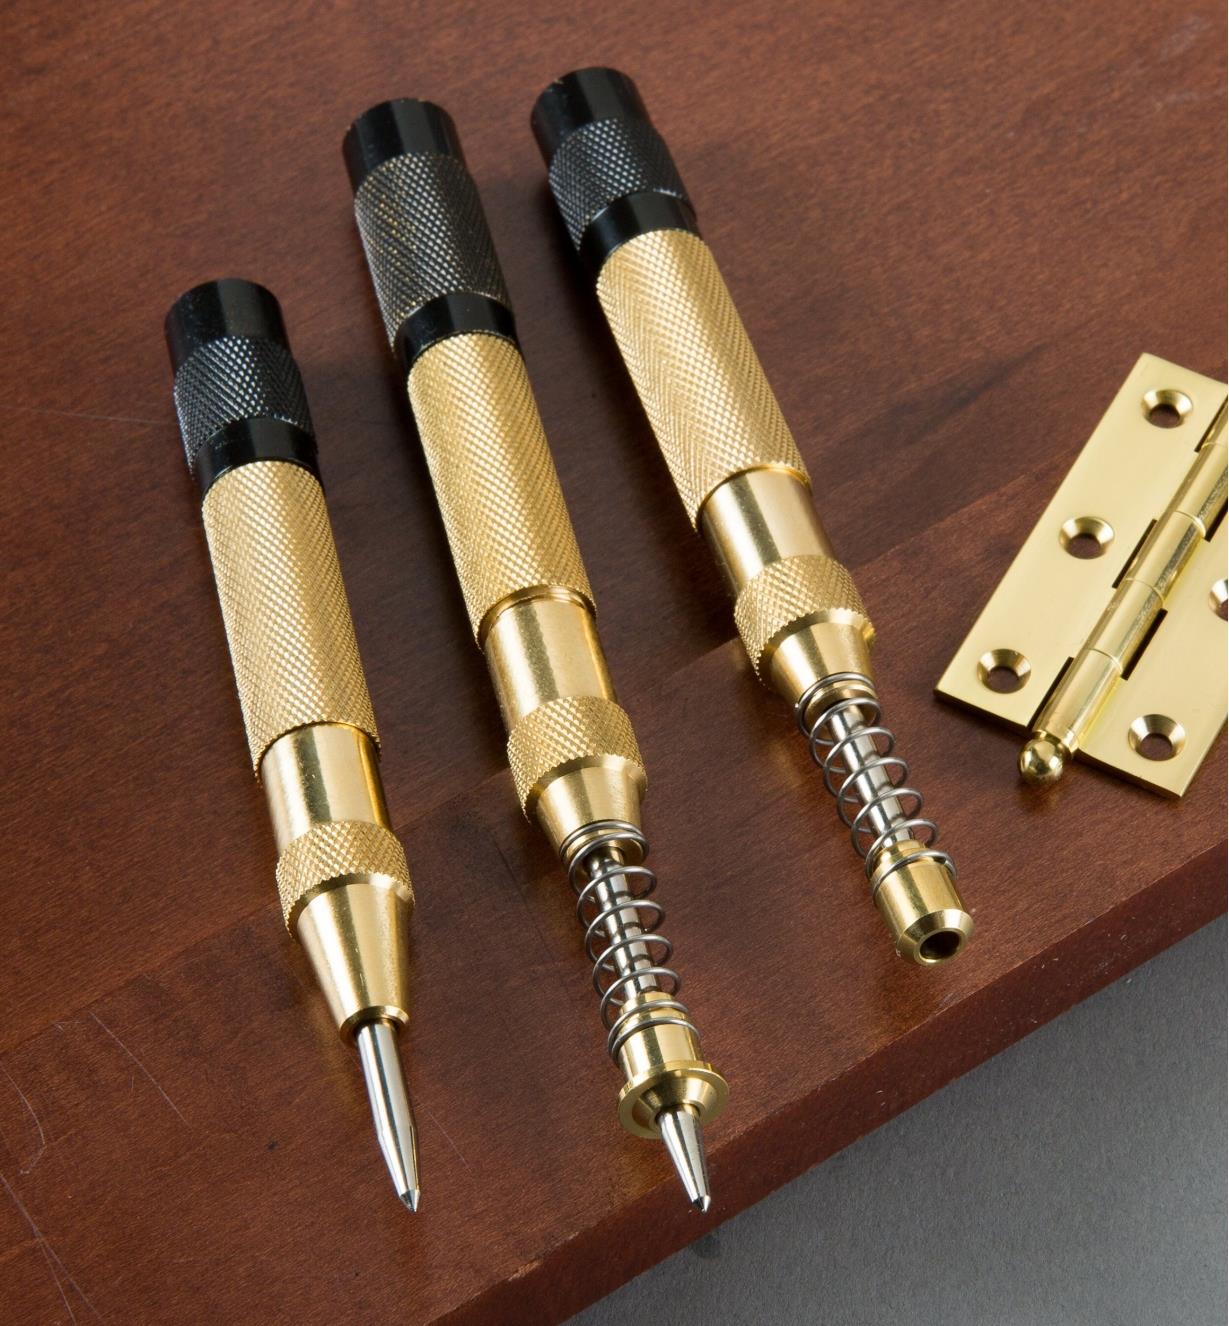 Awl Puncher with Cushion Cap,Hand Tool for Metal,Wood,Plastic 4 Pack Automatic Center Punch,Sweetfamily 5 inch Brass Spring Loaded Center Hole Punch with Adjustable Tension 